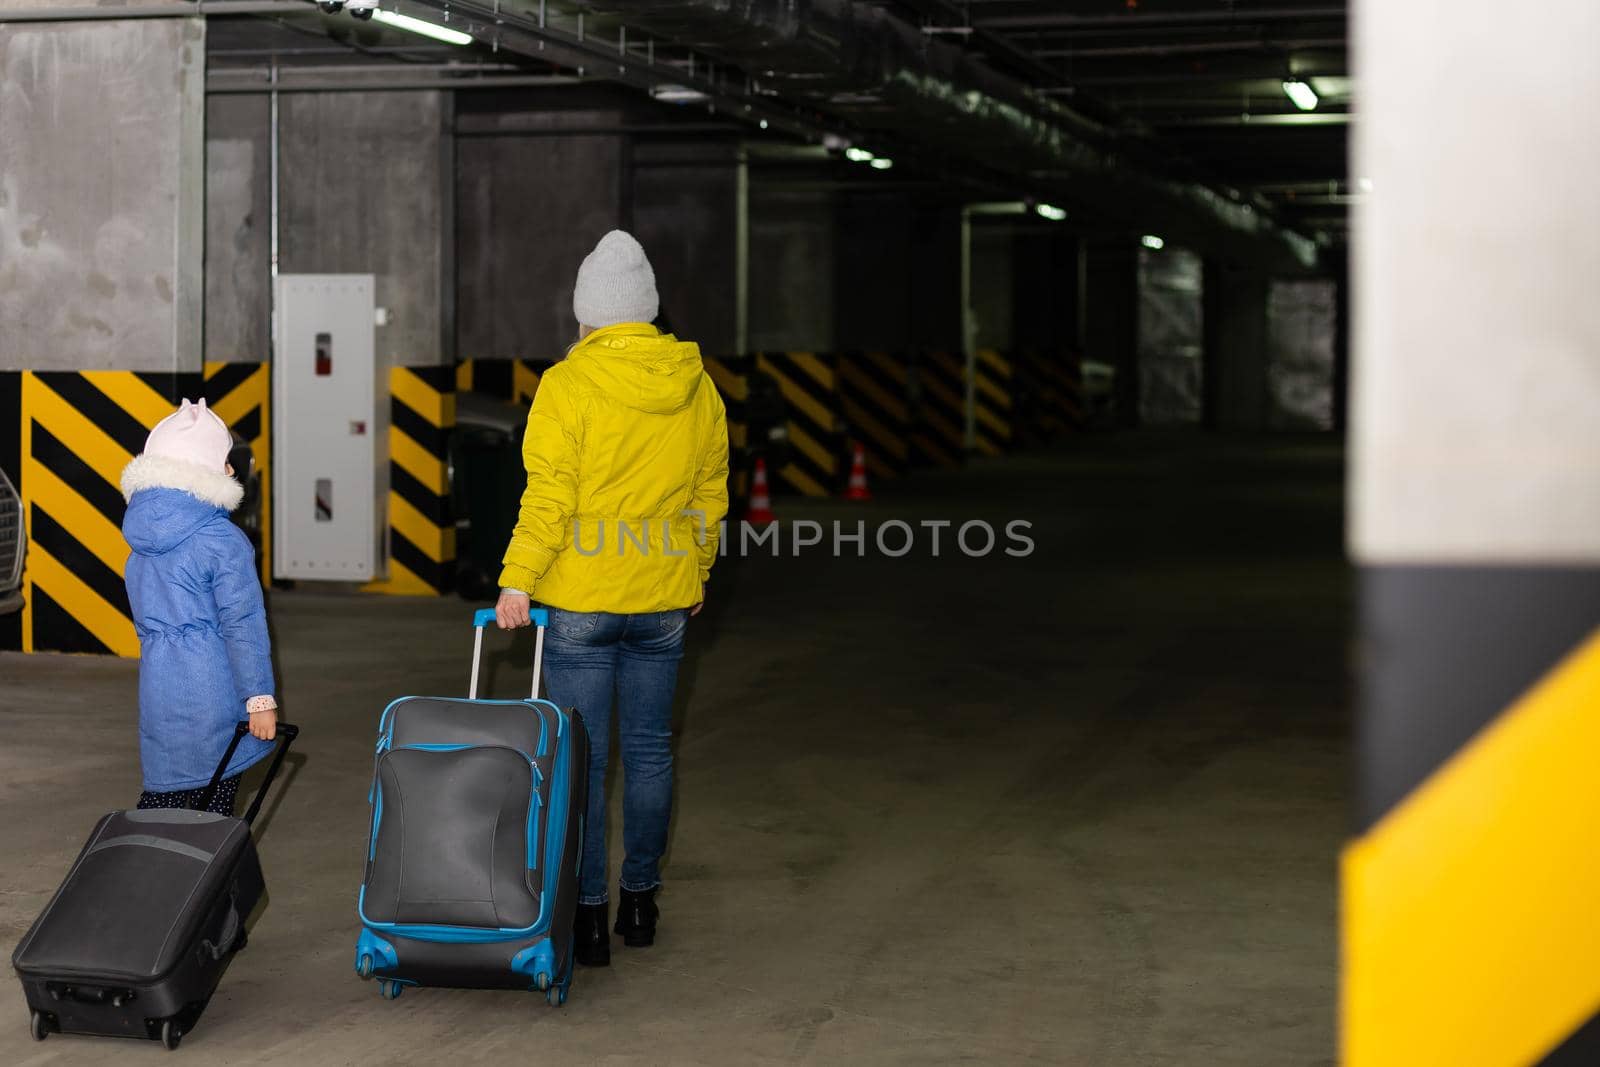 mother and daughter with luggage on wheels in underground parking